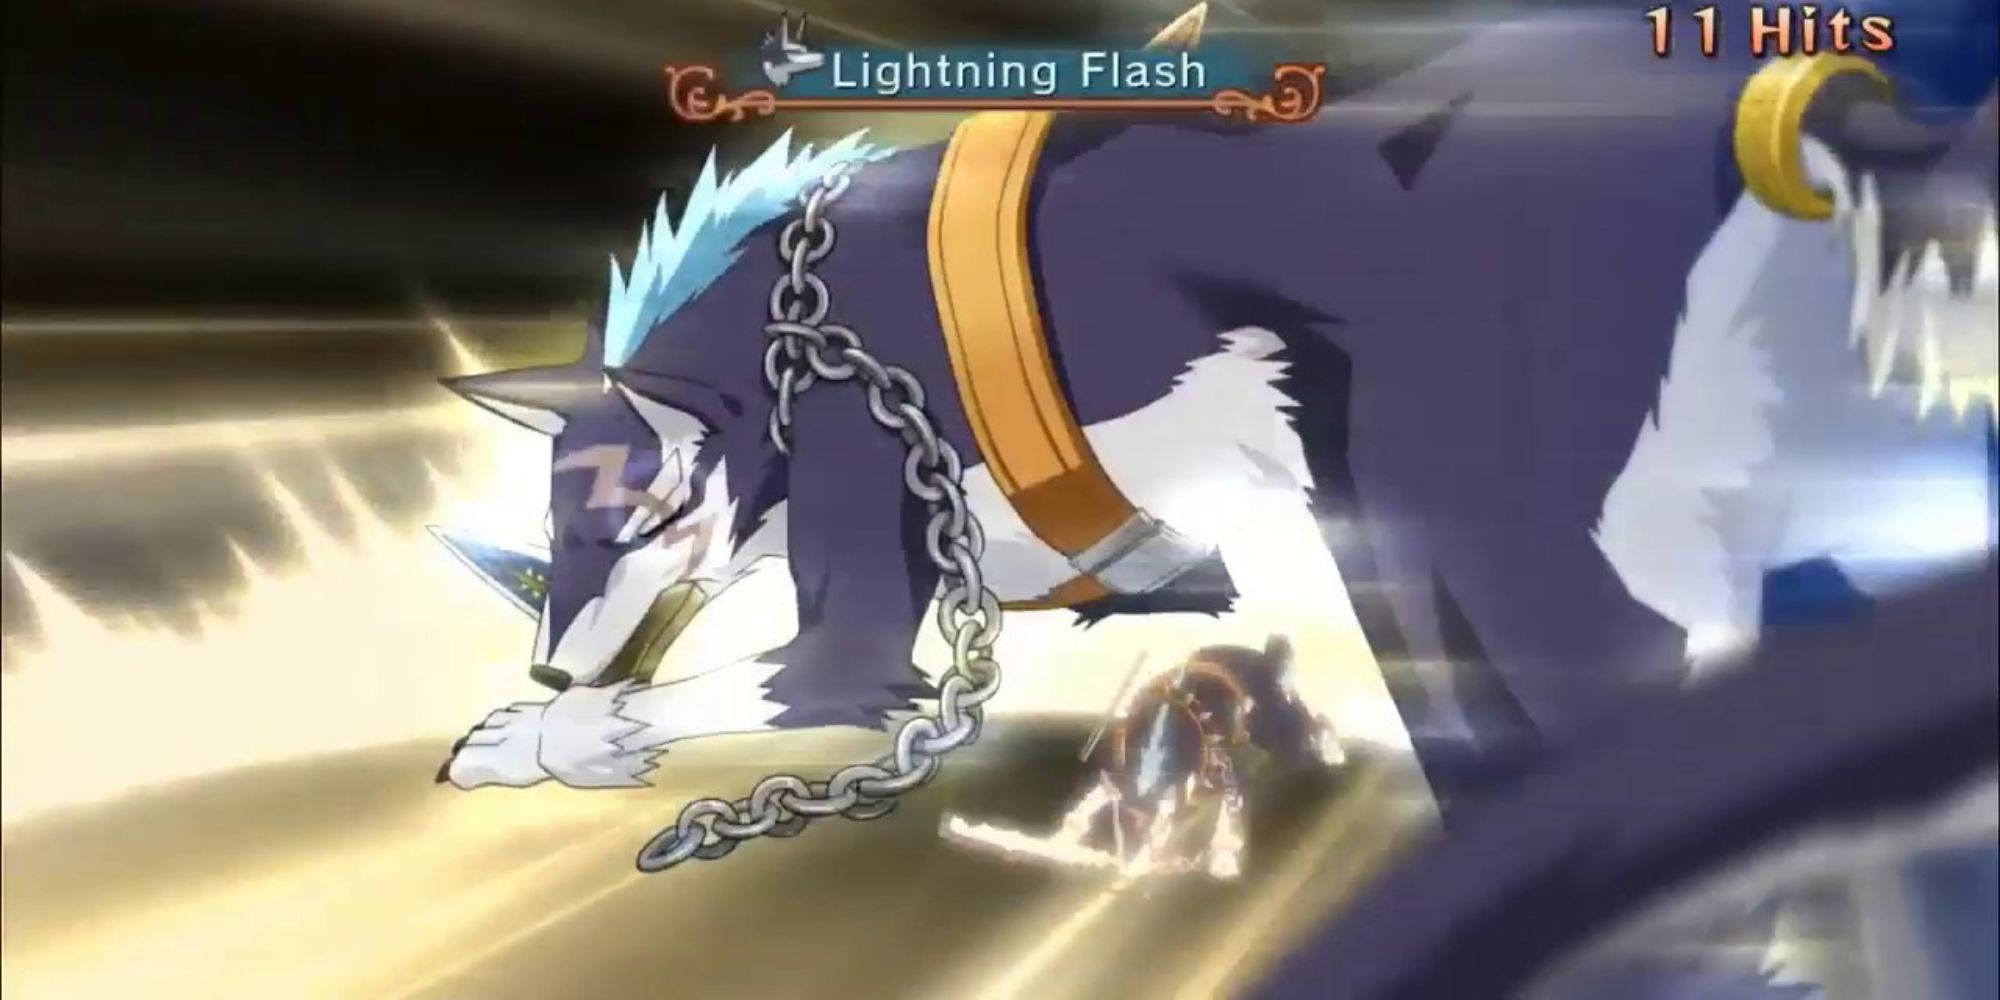 Repede using their dagger in combat sliding on the ground with chain dragging and getting 11 hits while Lightning Flash appears in text